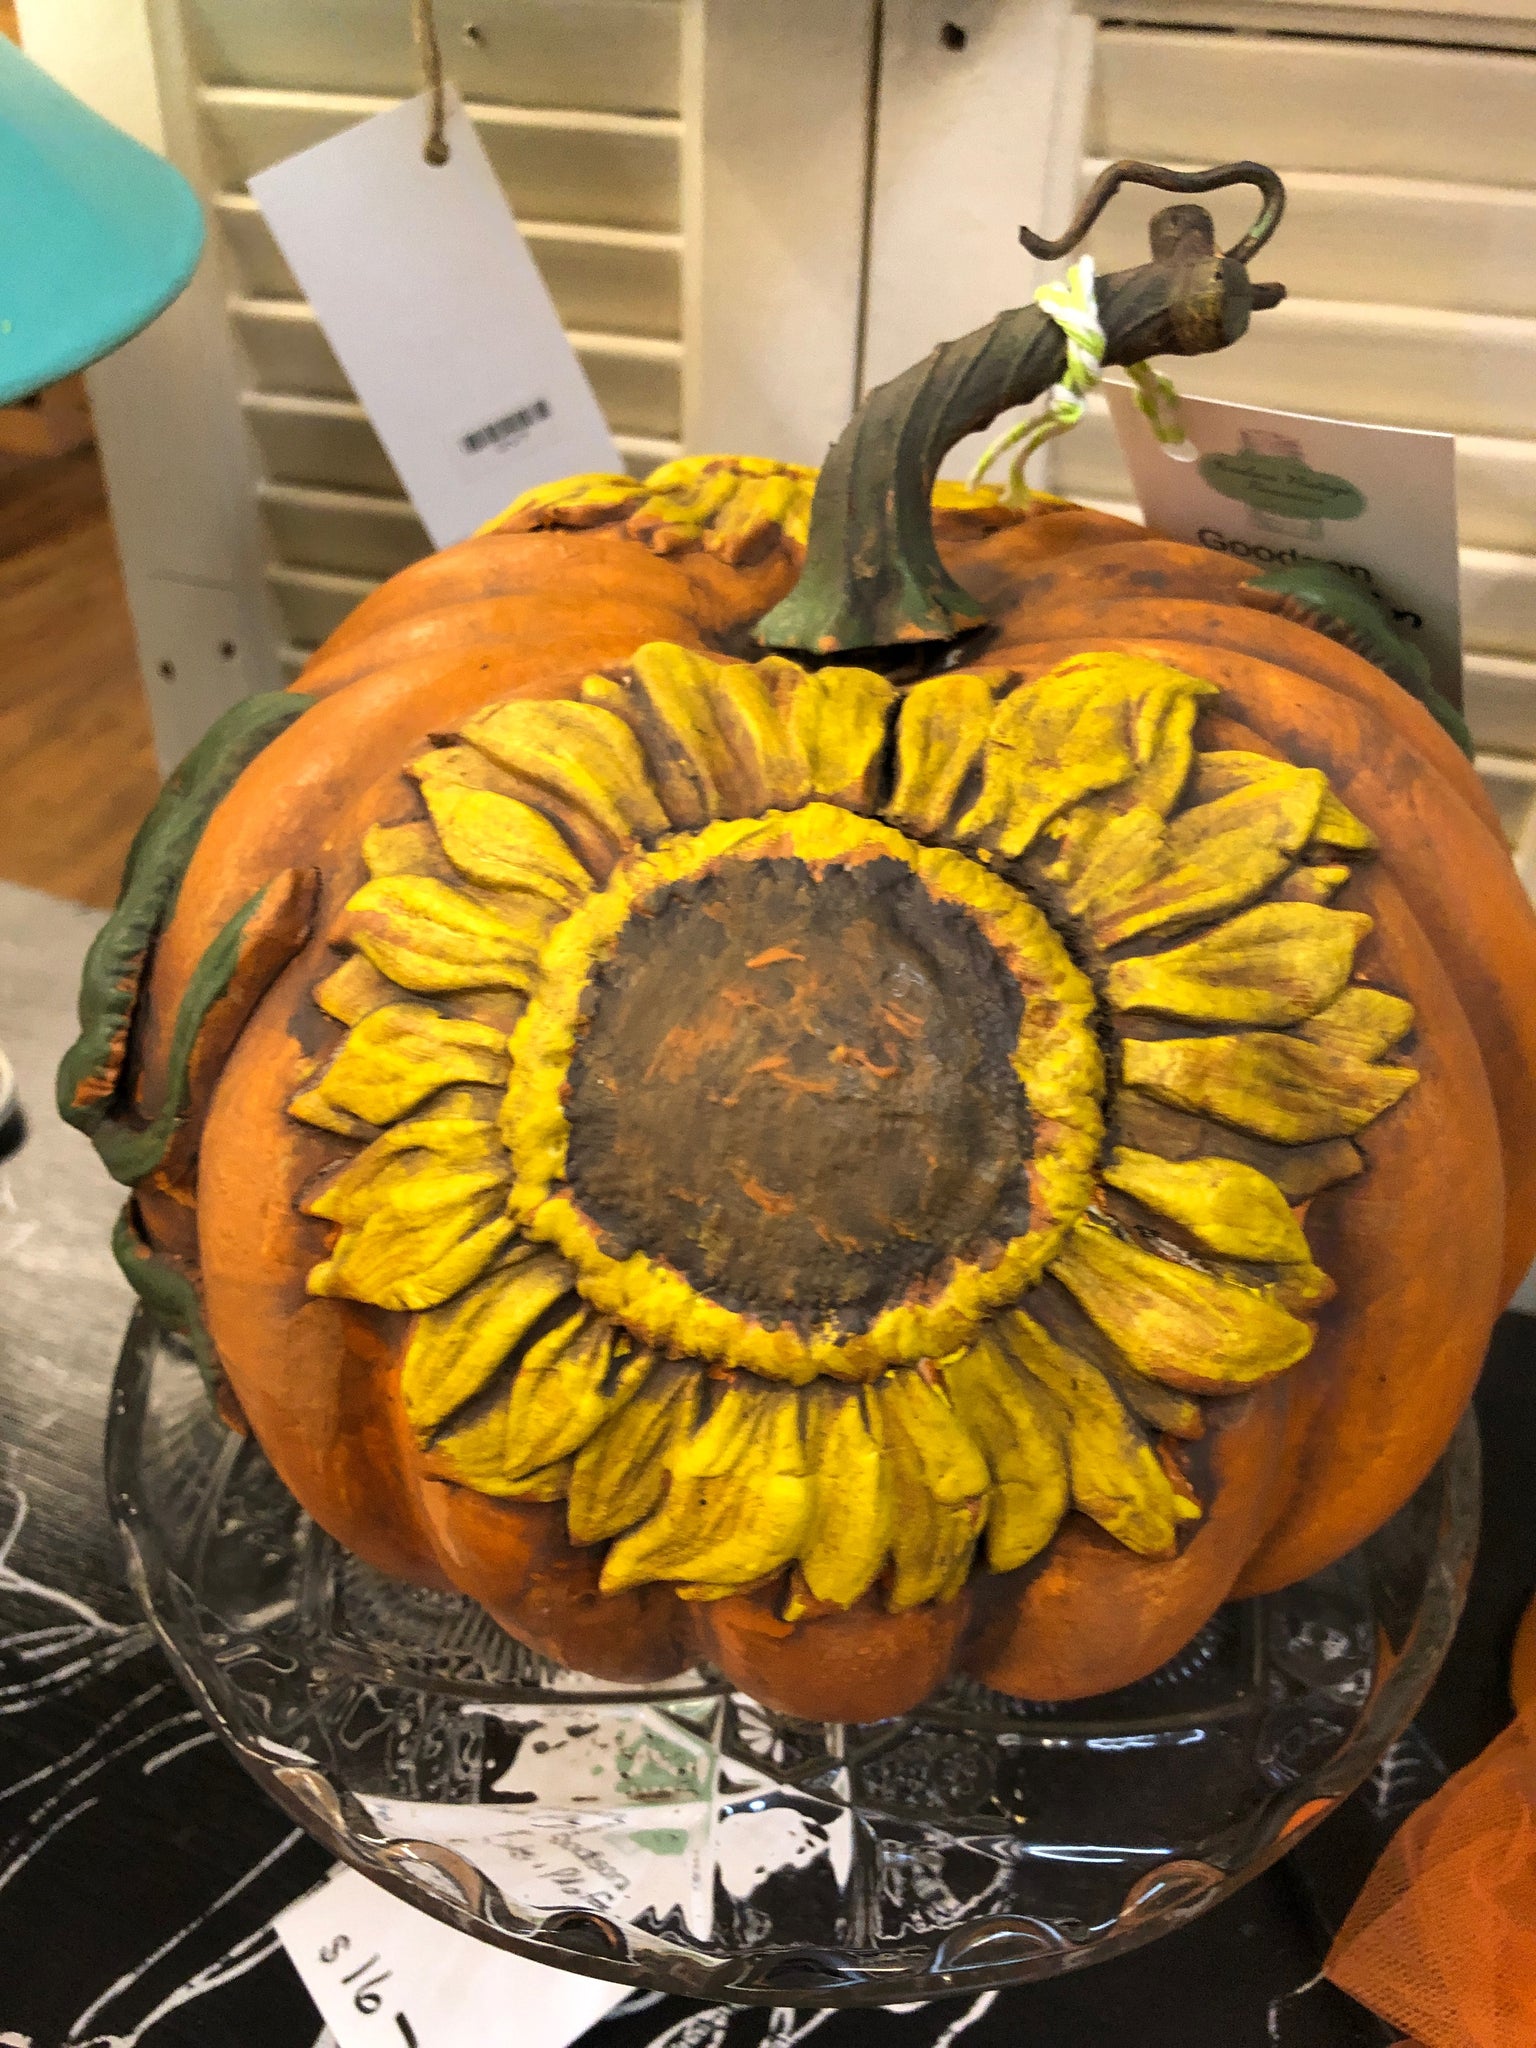 IOD Decor Mould Sunflowers by Iron Orchid Designs